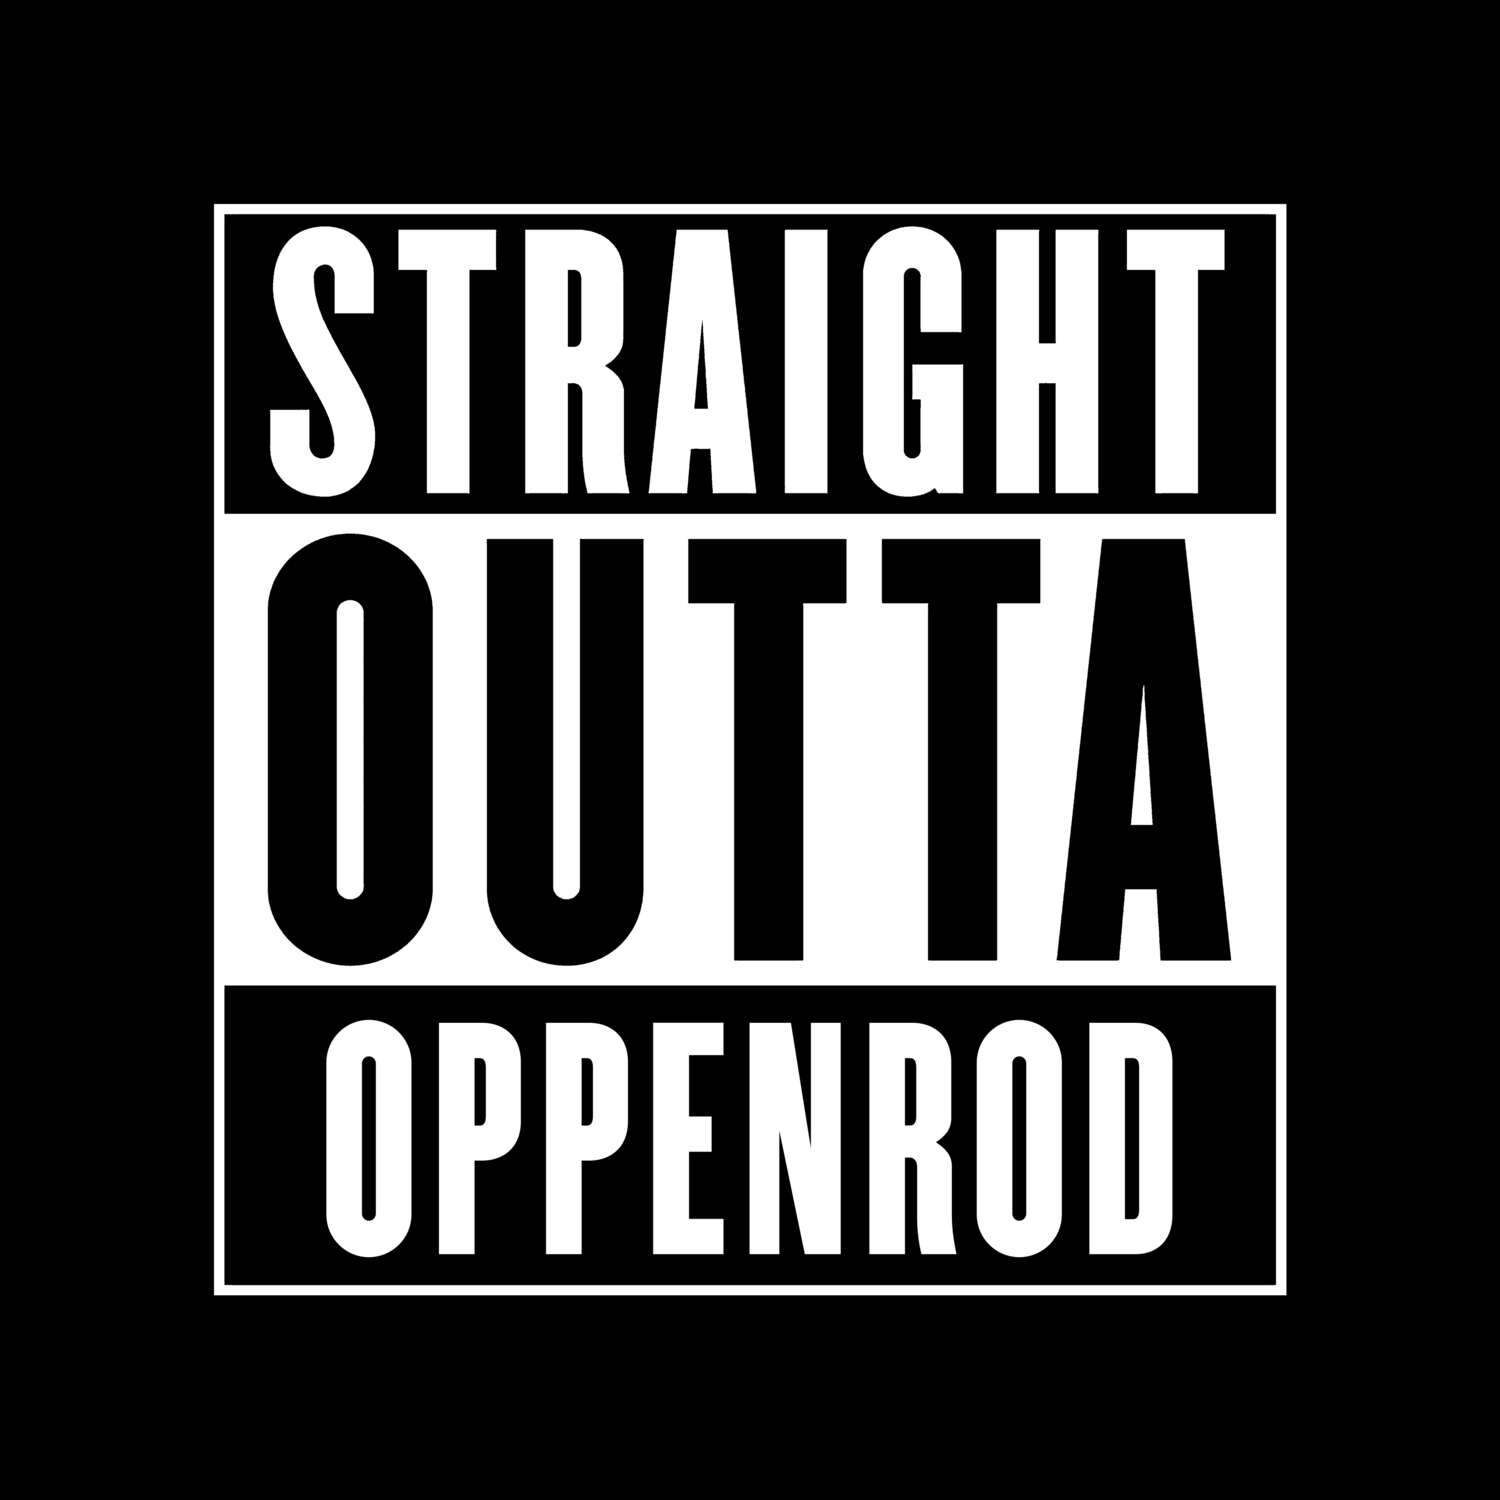 Oppenrod T-Shirt »Straight Outta«